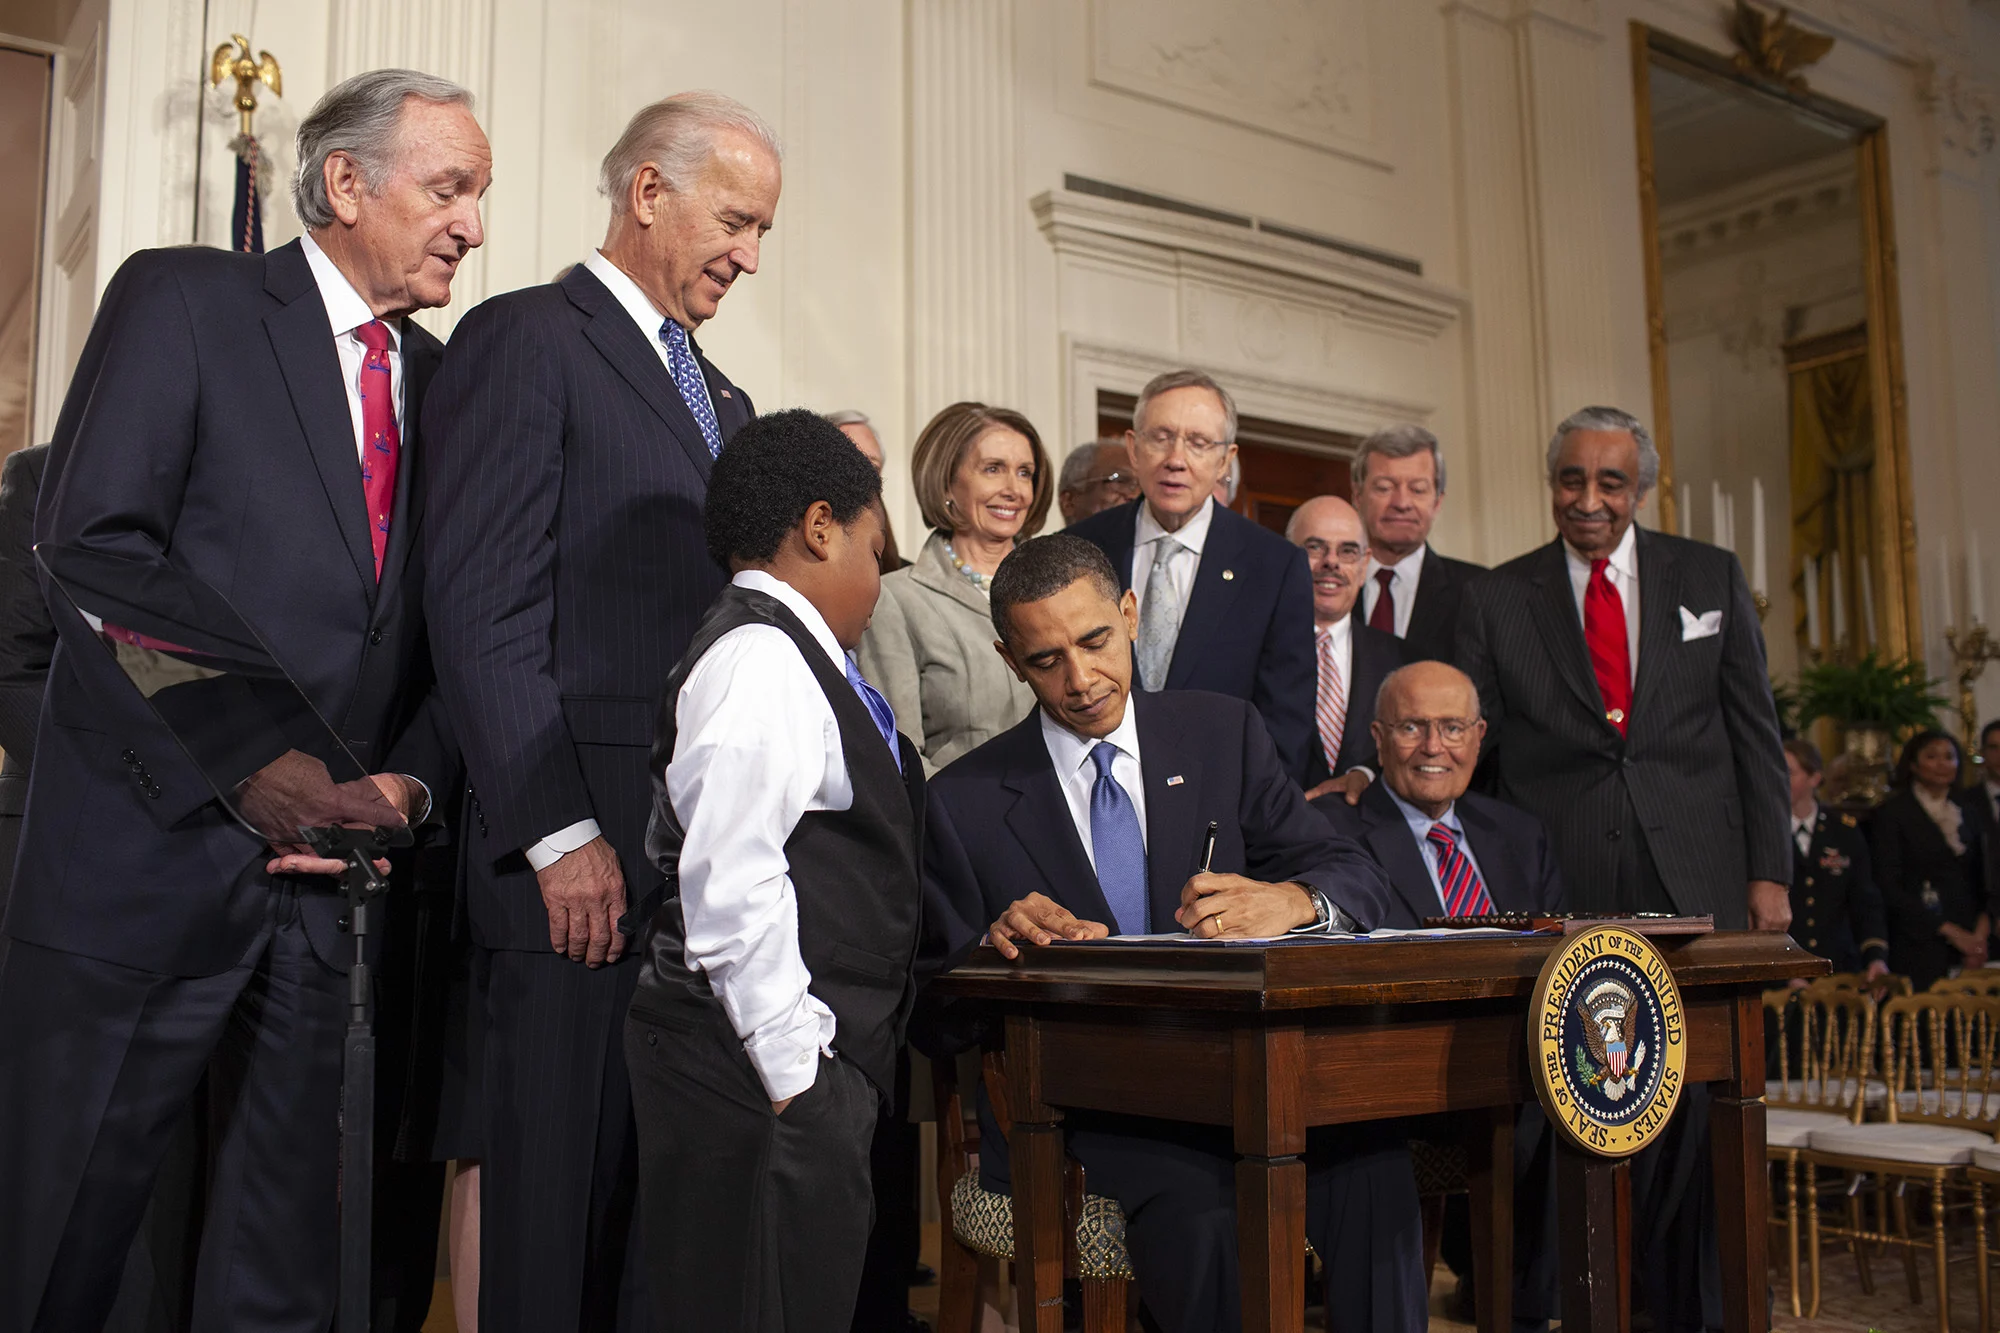 President Obama sits at a desk signing a document, surrounded by a group of politicians and a young boy.